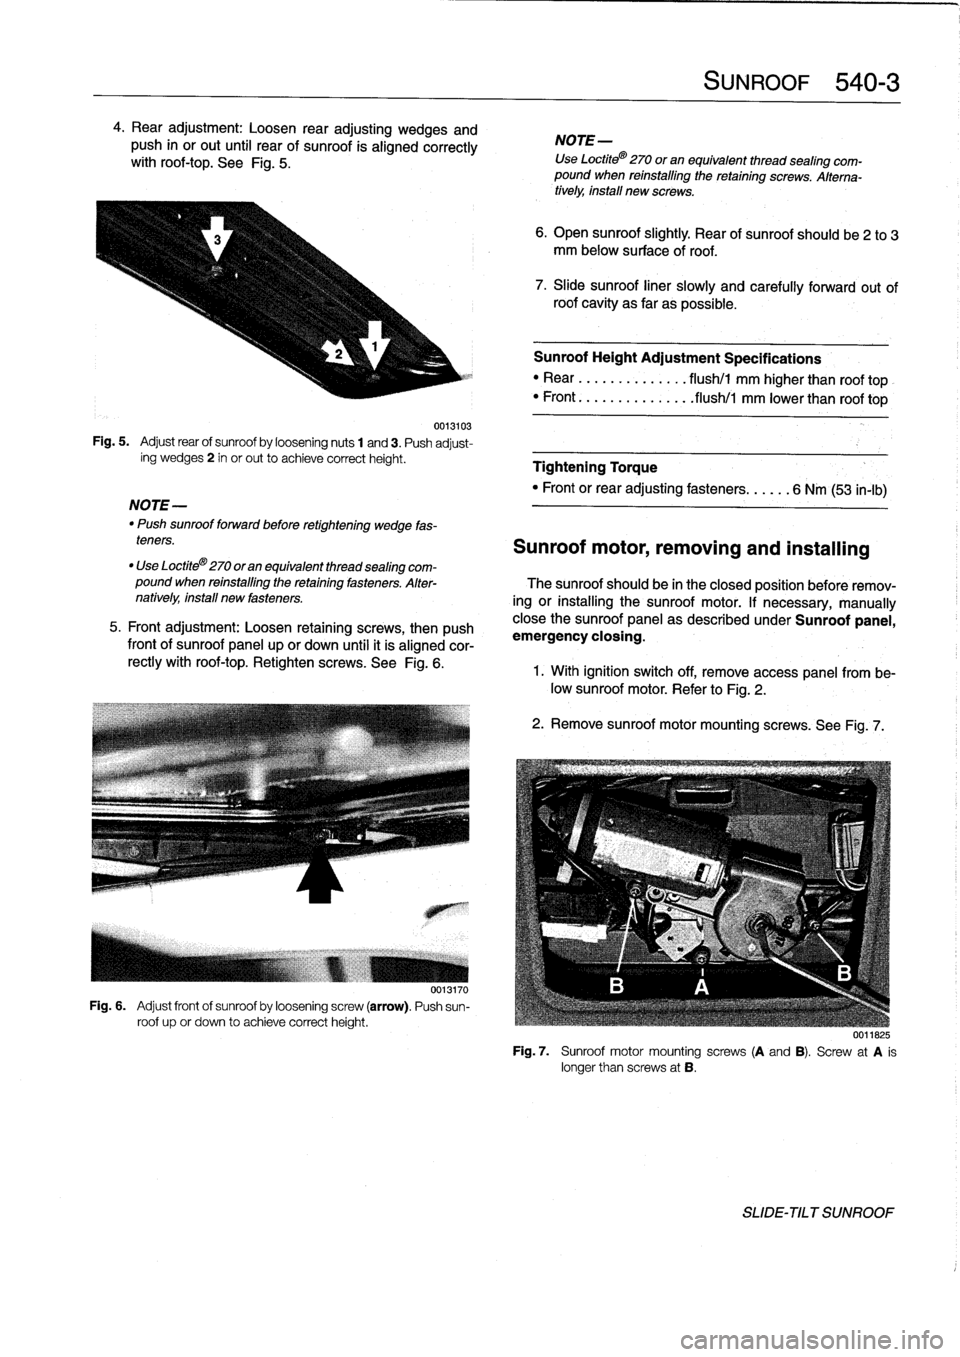 BMW M3 1996 E36 Workshop Manual 4
.
Rear
adjustment
:
Loosen
rear
adjusting
wedges
and
push
in
or
out
until
rear
of
sunroof
is
aligned
correctly
withroof-top
.
See
Fig
.
5
.

0013103
Fig
.
5
.

	

Adjust
rear
of
sunroof
by
loosening